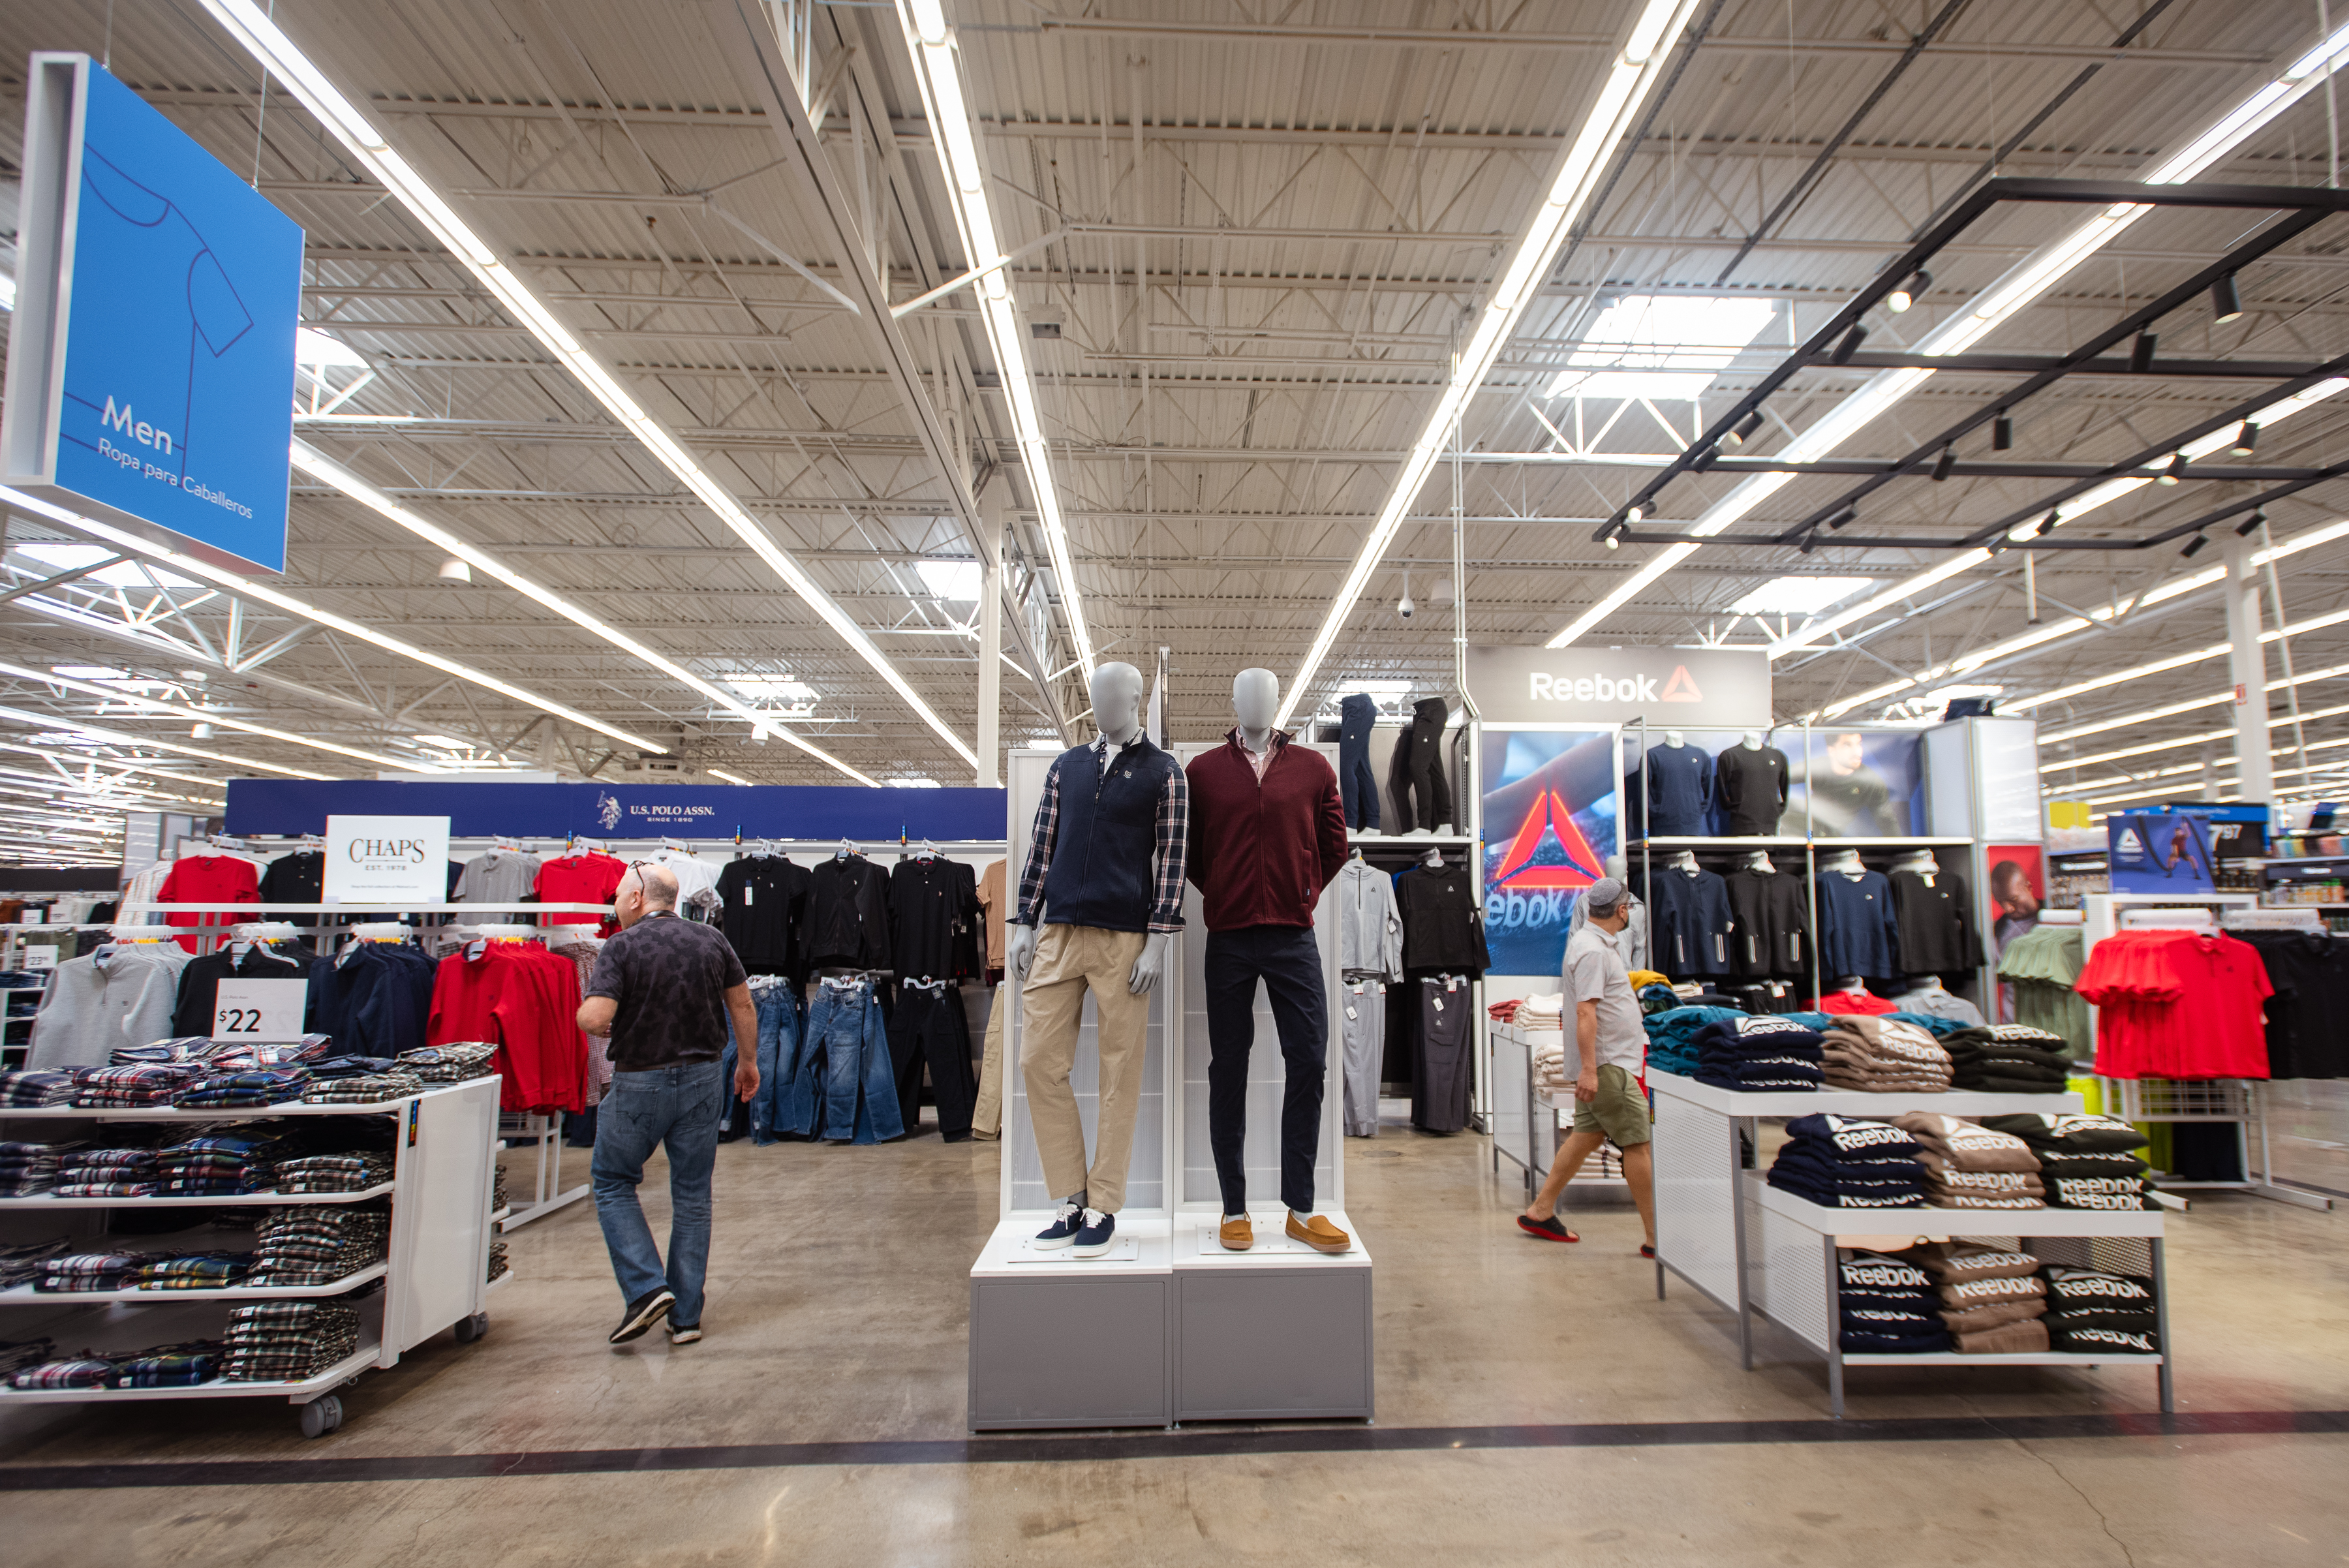 Walmart's Brings its New Look to New Jersey